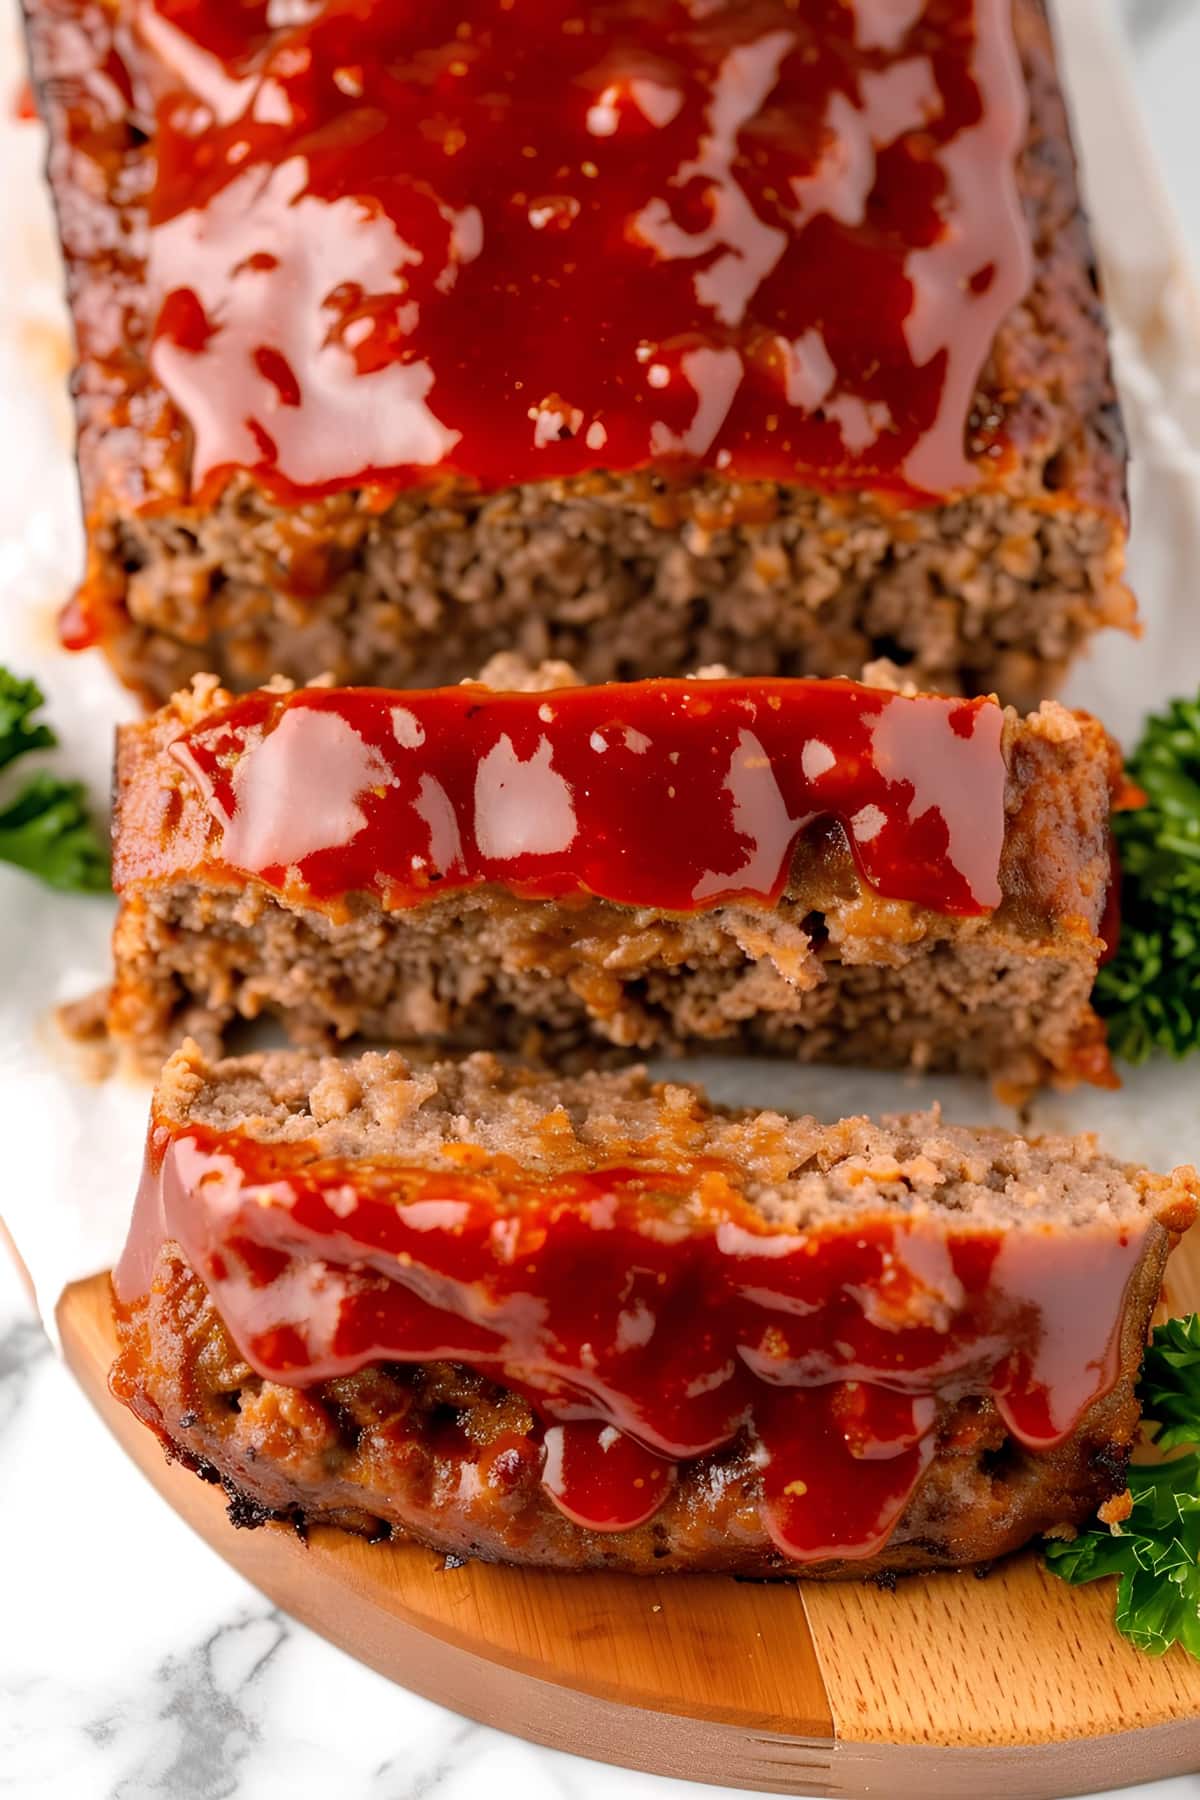 Sliced homemade meatloaf topped with ketchup glaze on a wooden board